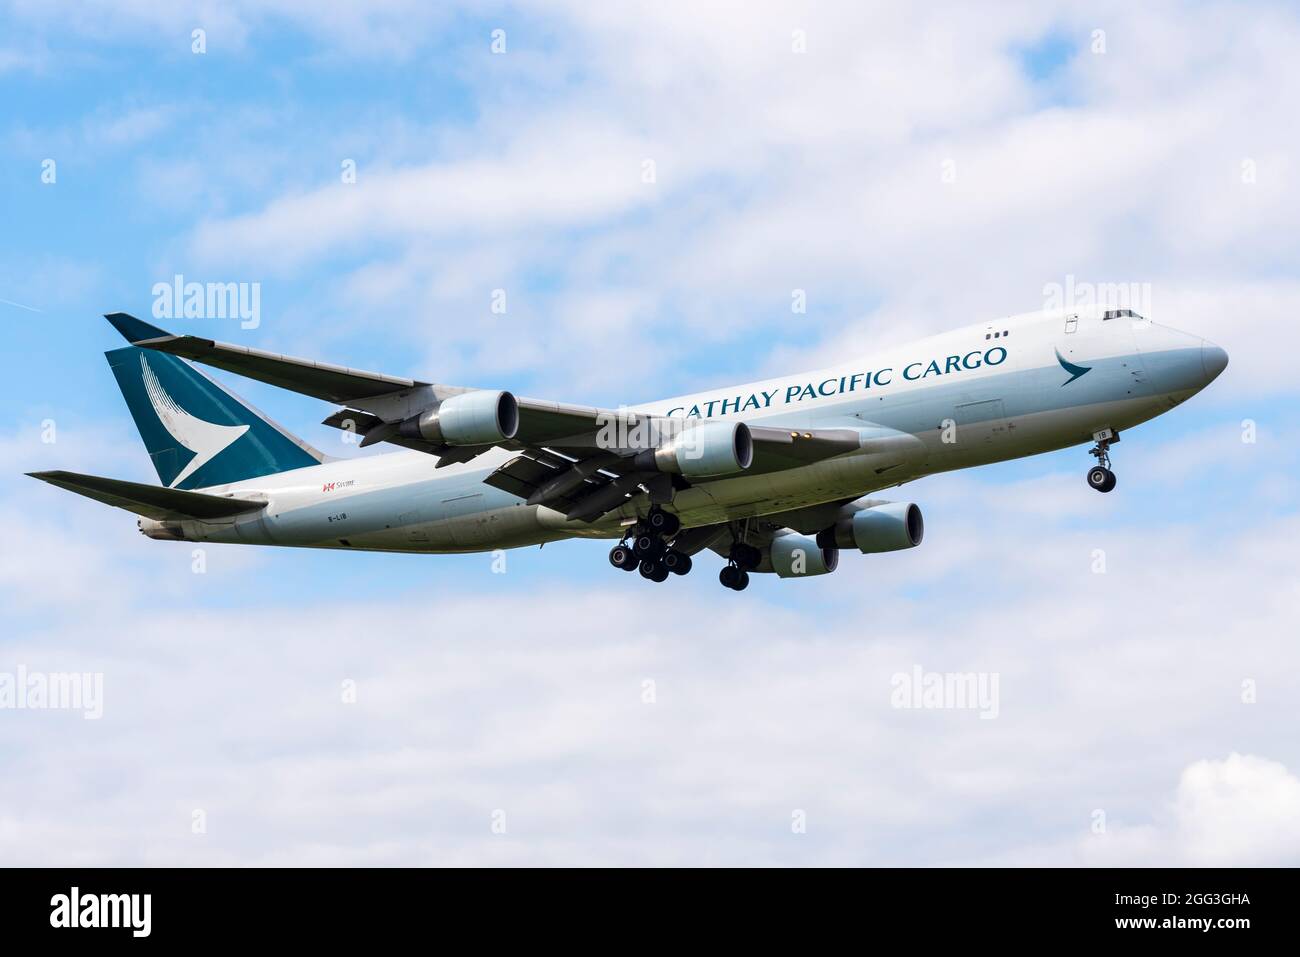 Cathay Pacific Cargo Boeing 747 Jumbo Jet freighter airliner jet plane B-LIB landing at London Heathrow Airport, UK. Freight carrier on finals to land Stock Photo